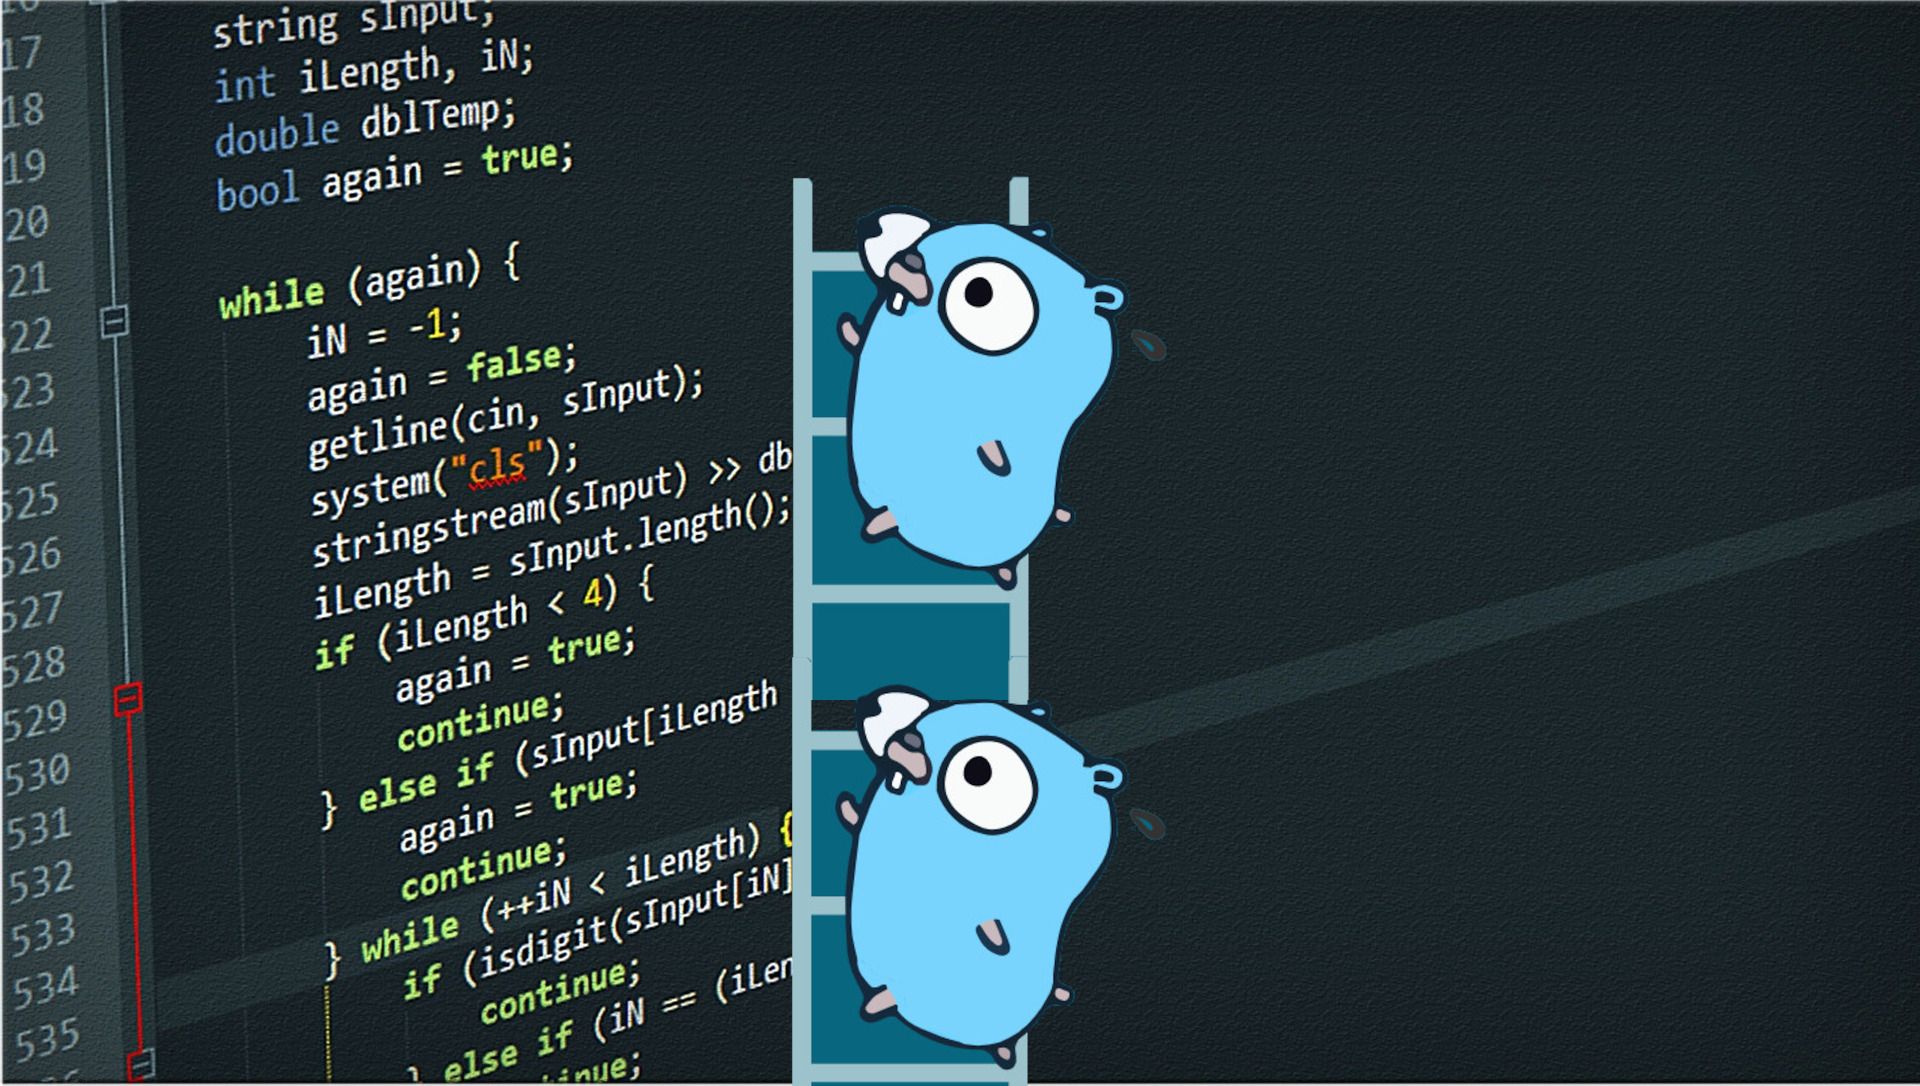 Code in code editor with Golang's logo